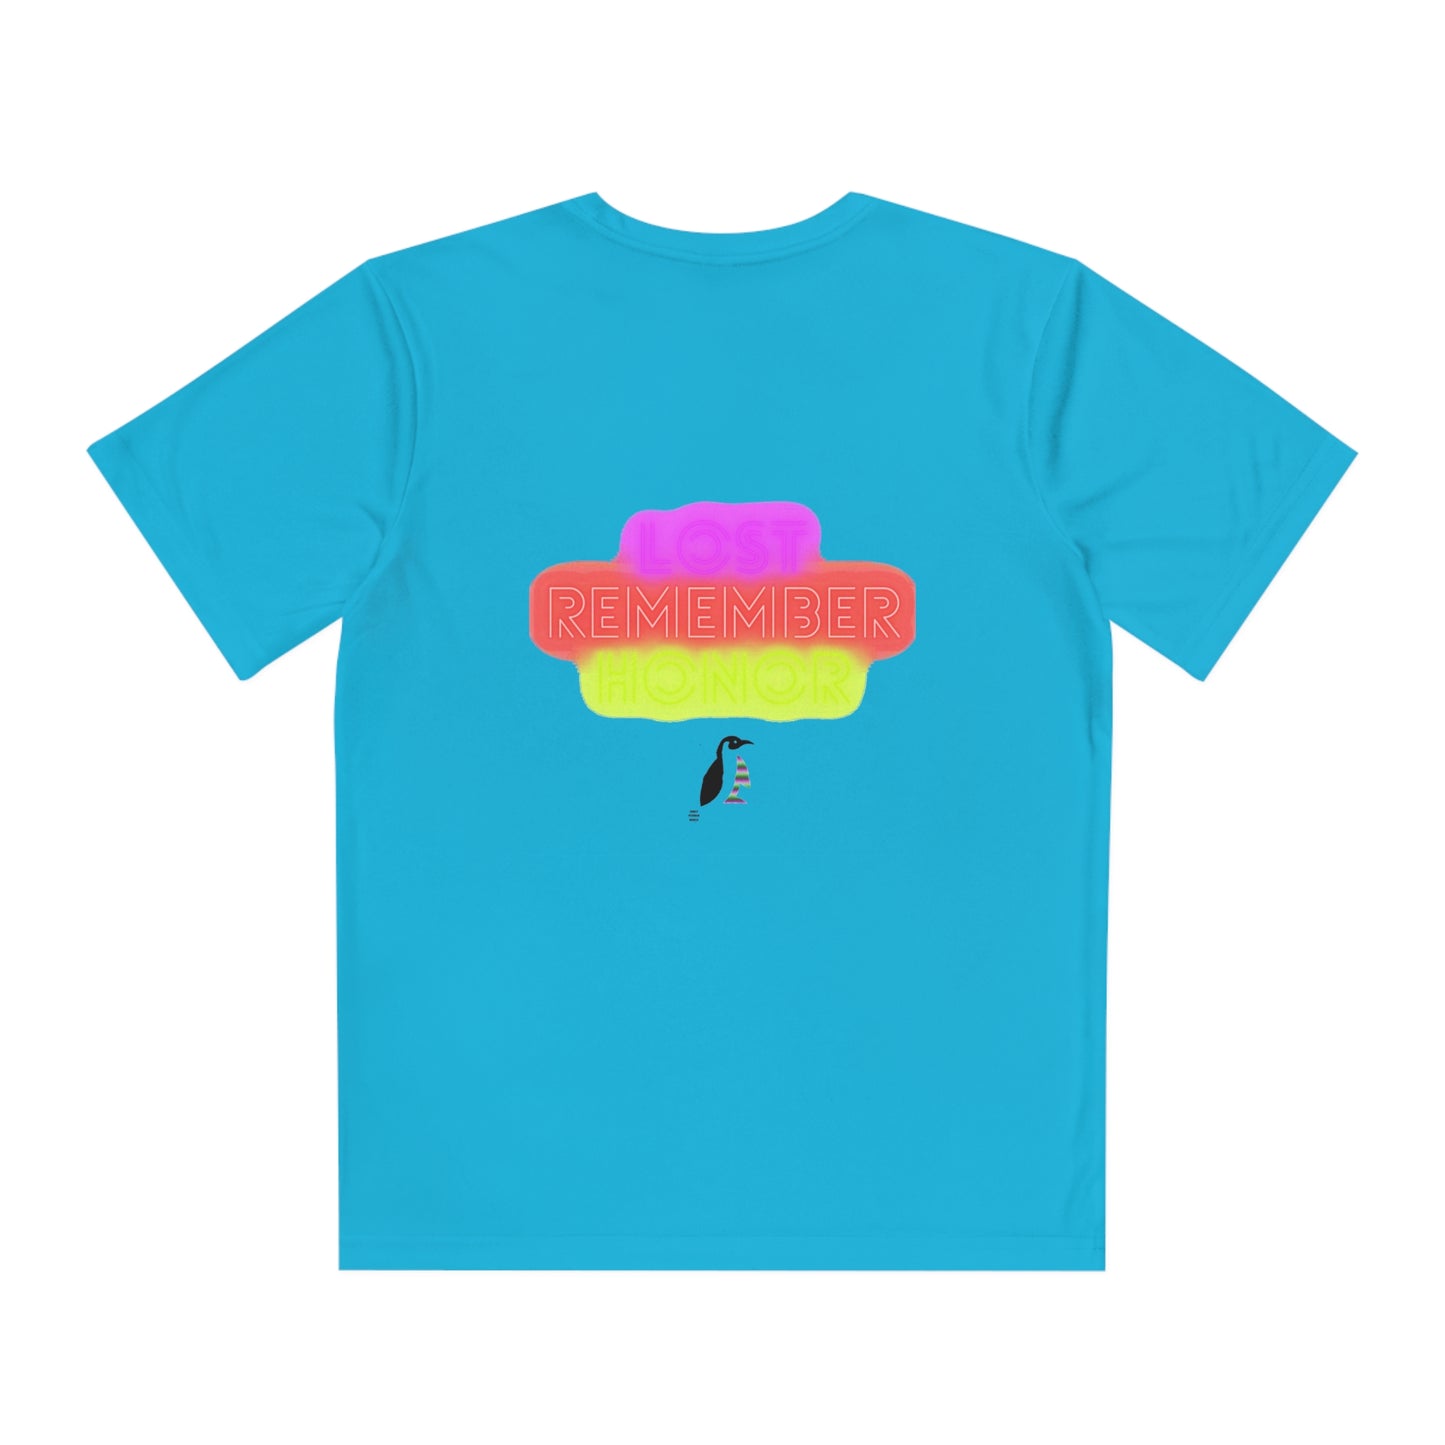 Youth Competitor Tee #2: Fishing